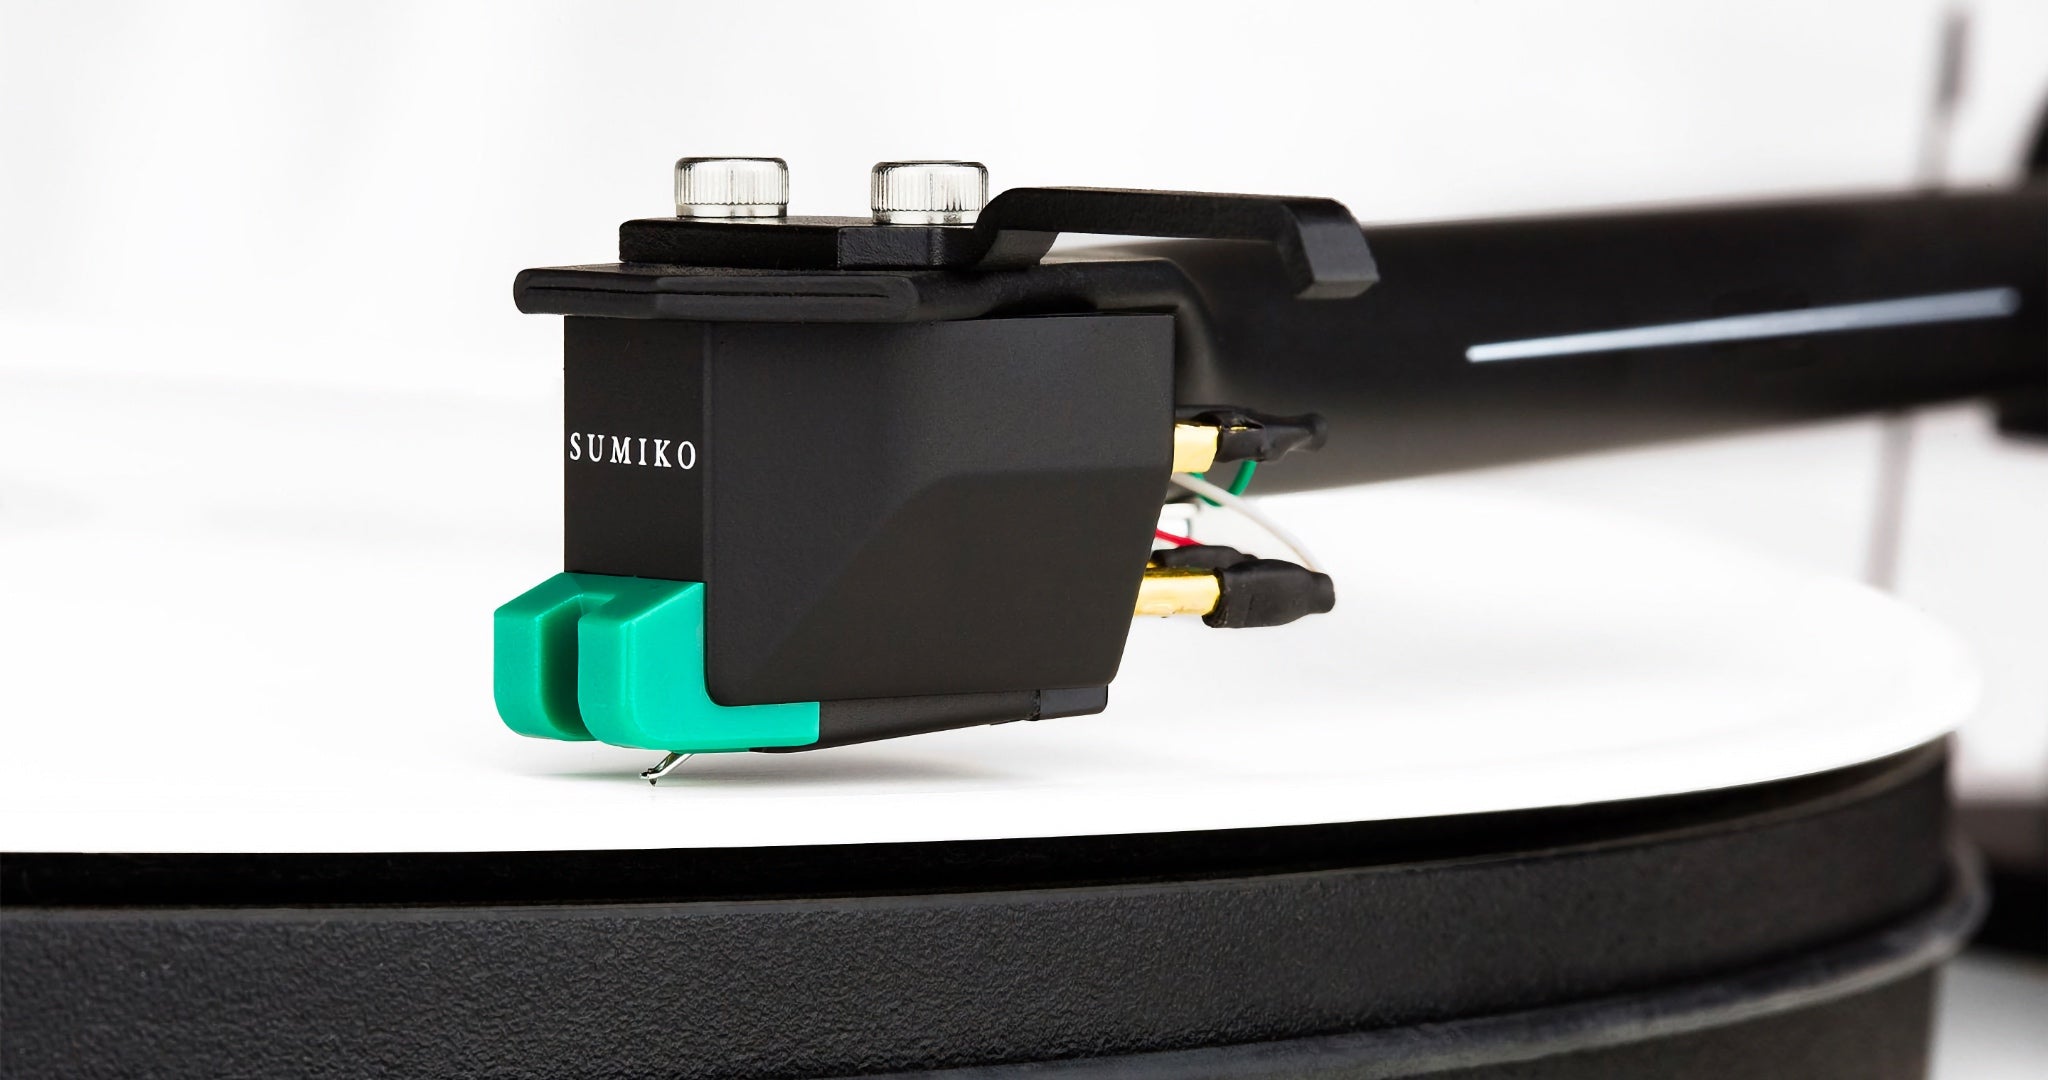 Sumiko Olympia phono cartridge mounted and engaged on turntable platter